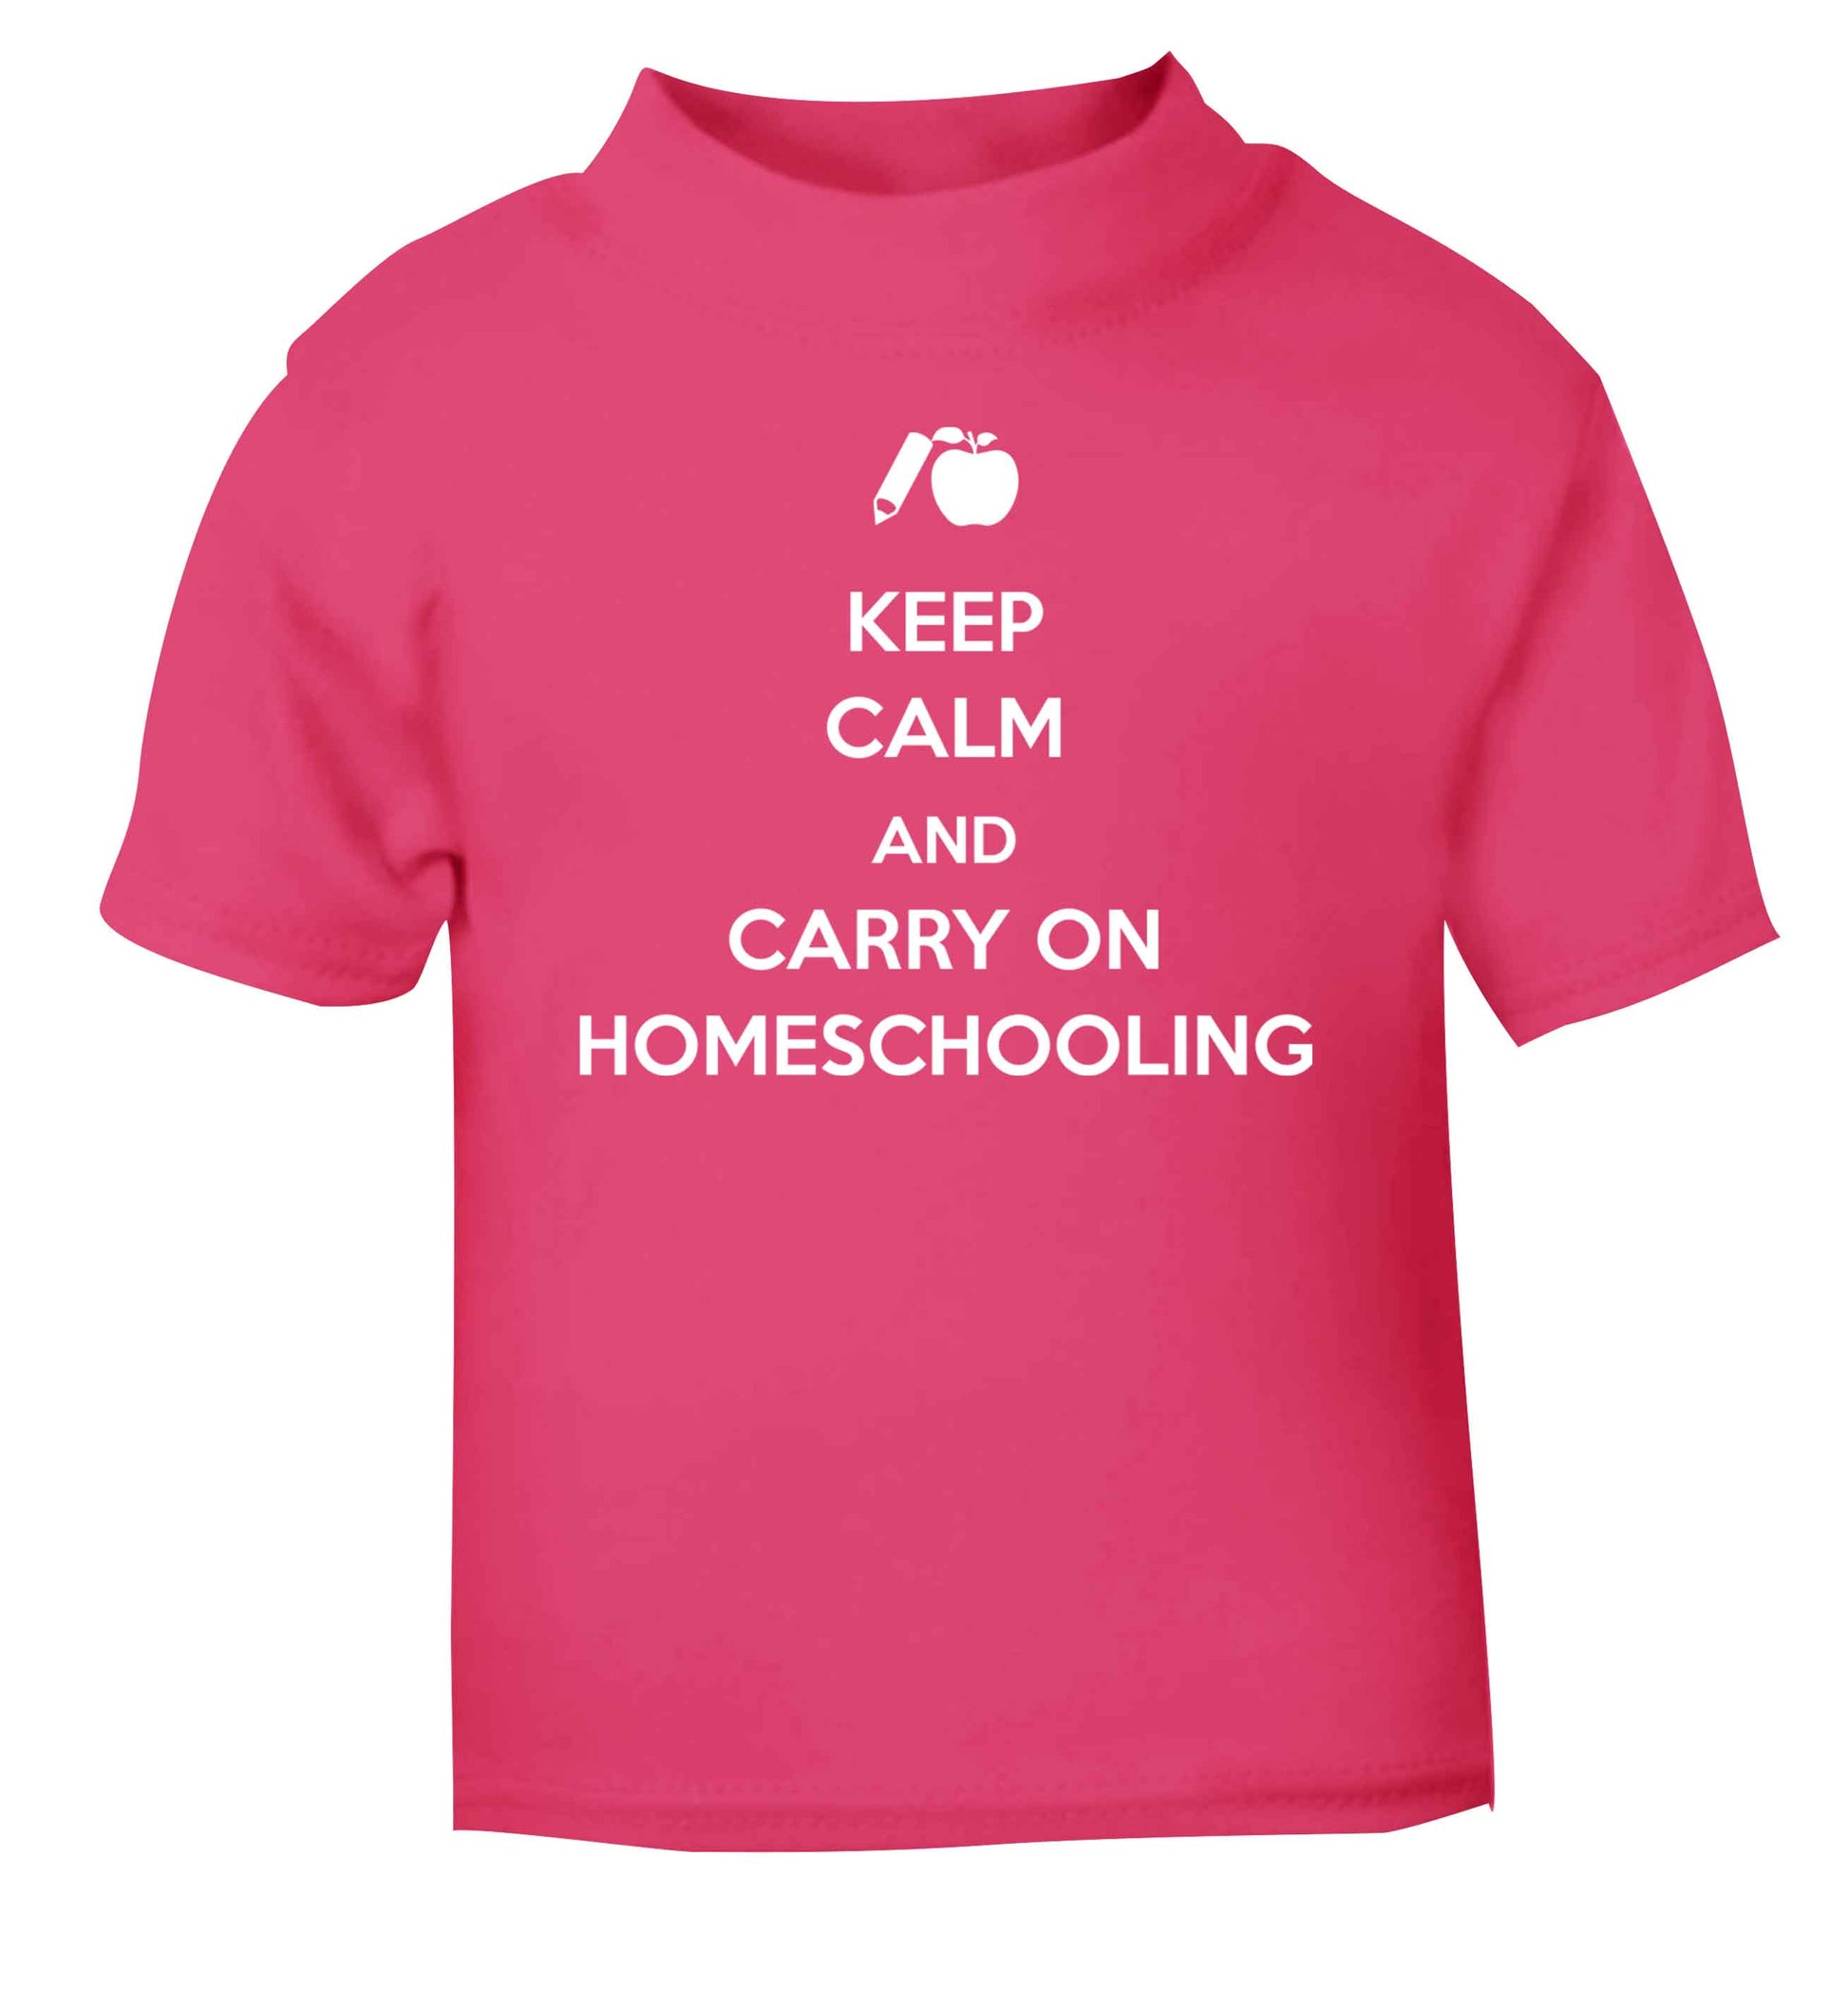 Keep calm and carry on homeschooling pink Baby Toddler Tshirt 2 Years